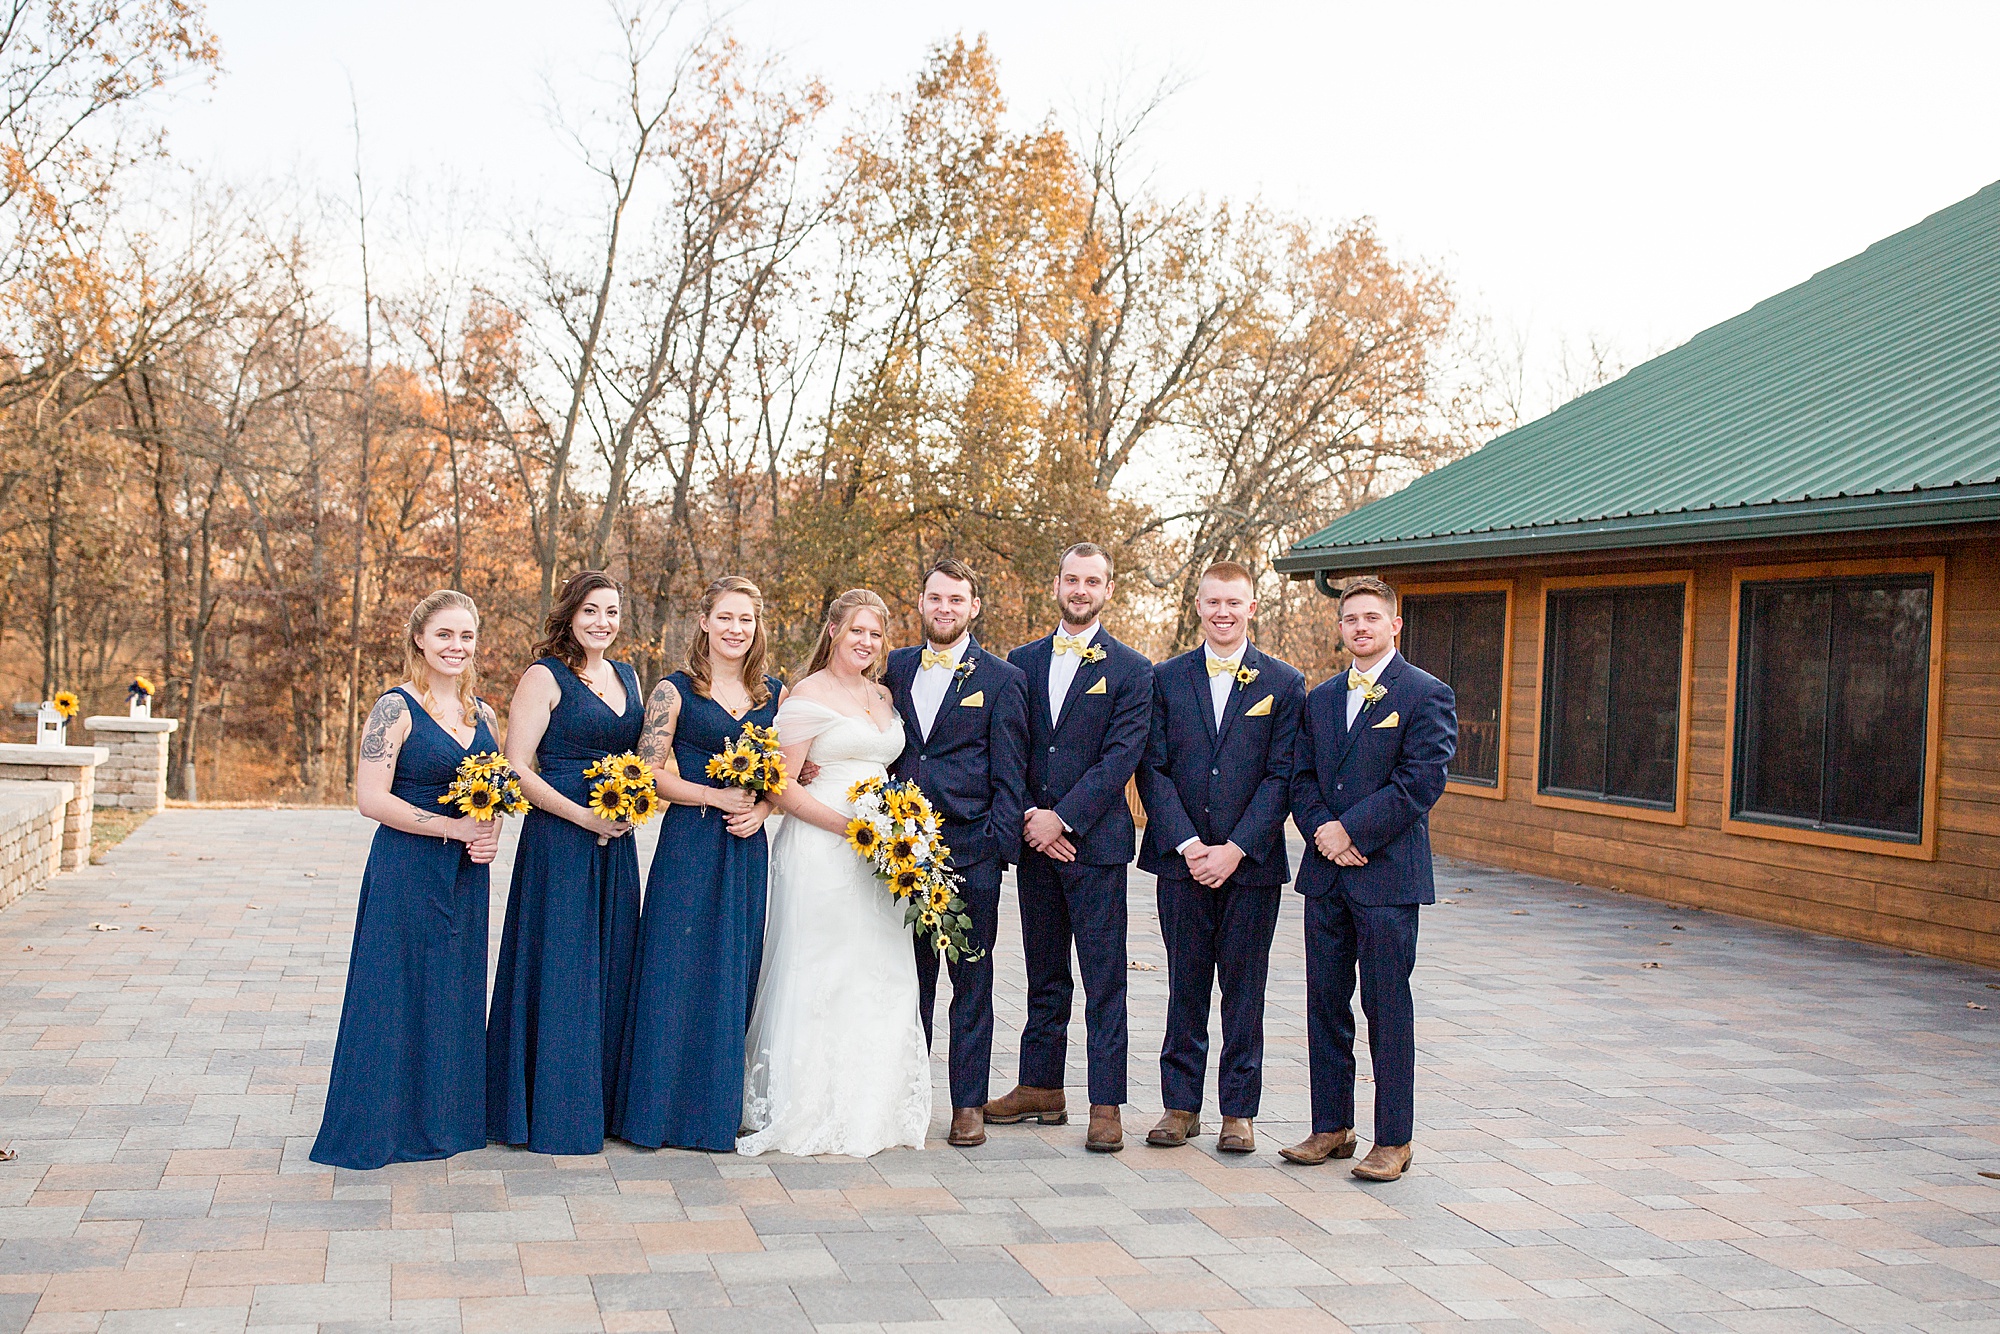 Quail Ridge Lodge wedding party with bride and groom